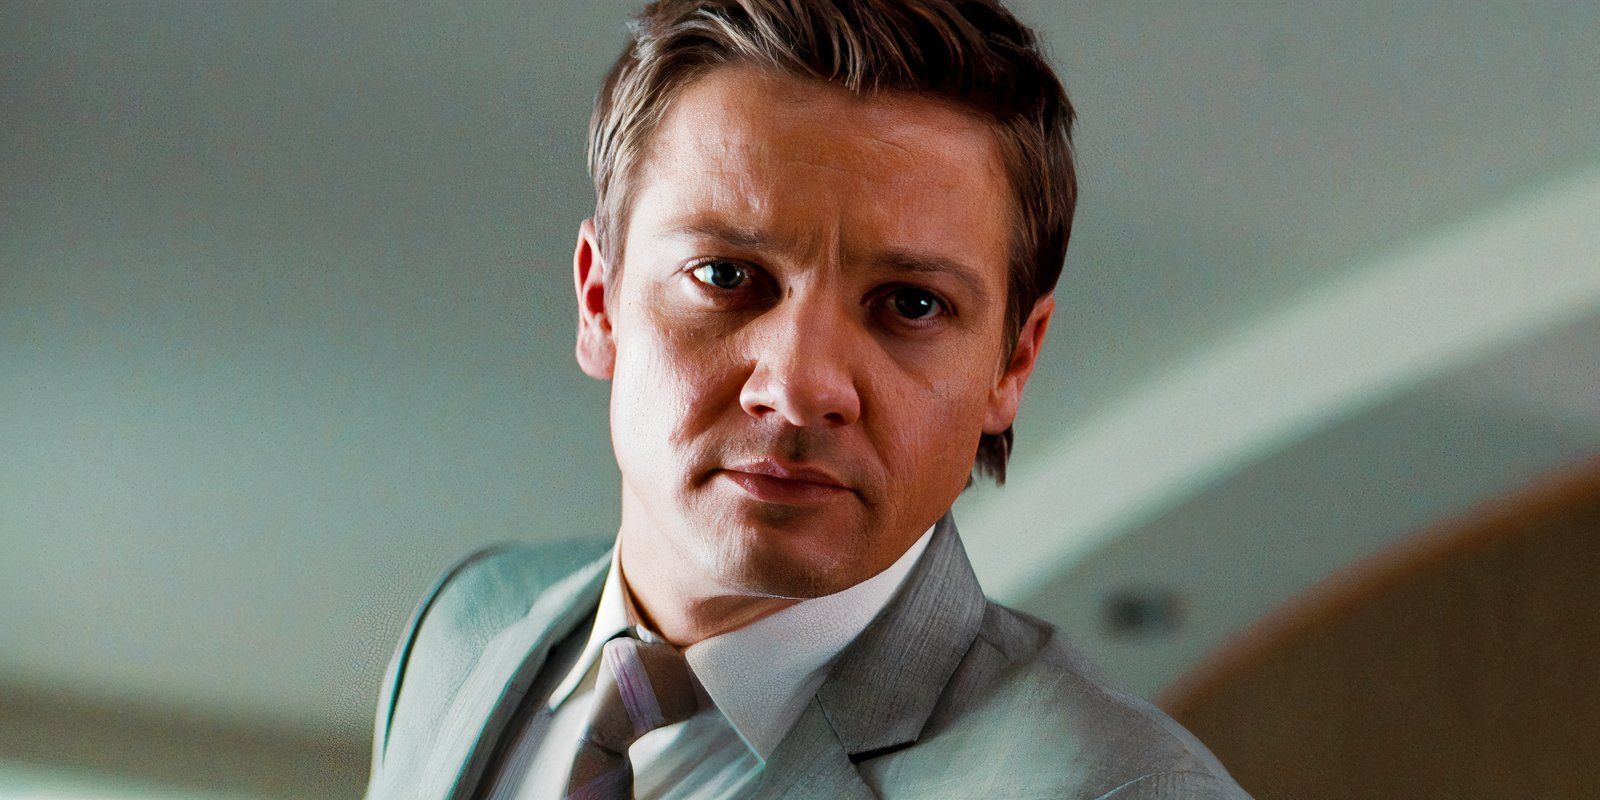 Jeremy Renner Shares Why He Left Mission Impossible Franchise and Hints at Possible Return